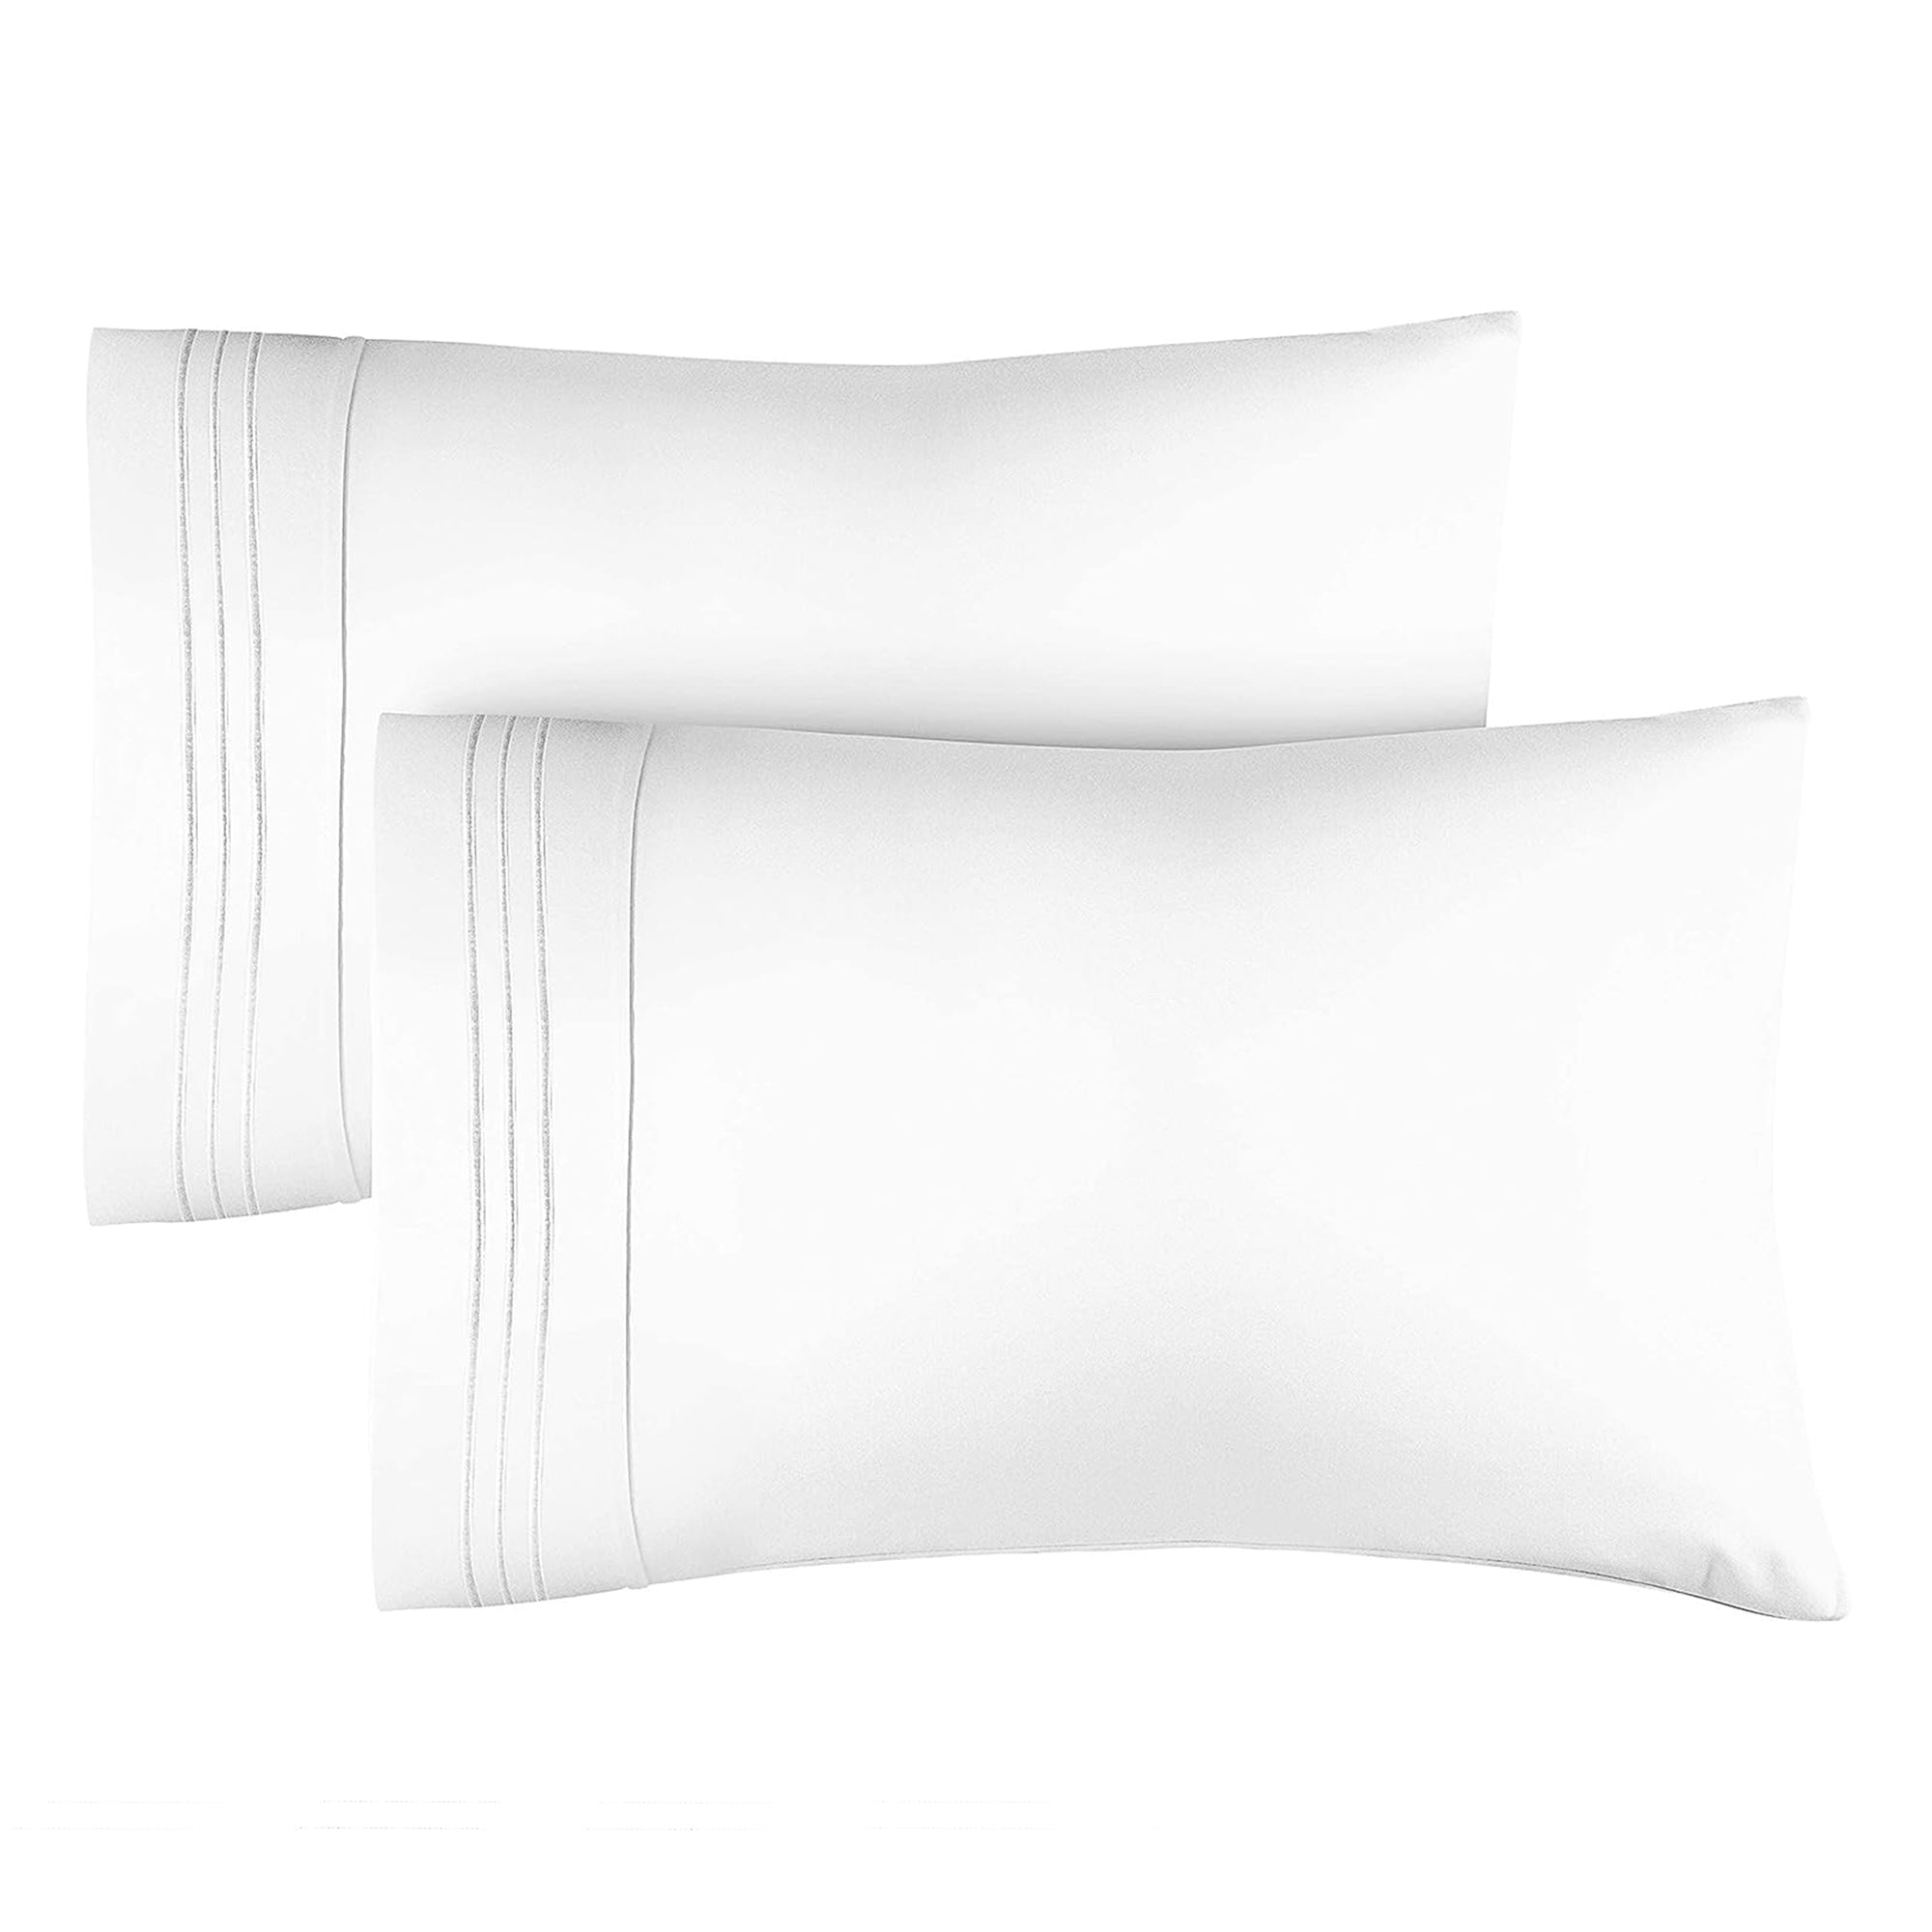 tes Two white pillowcases with embroidery.